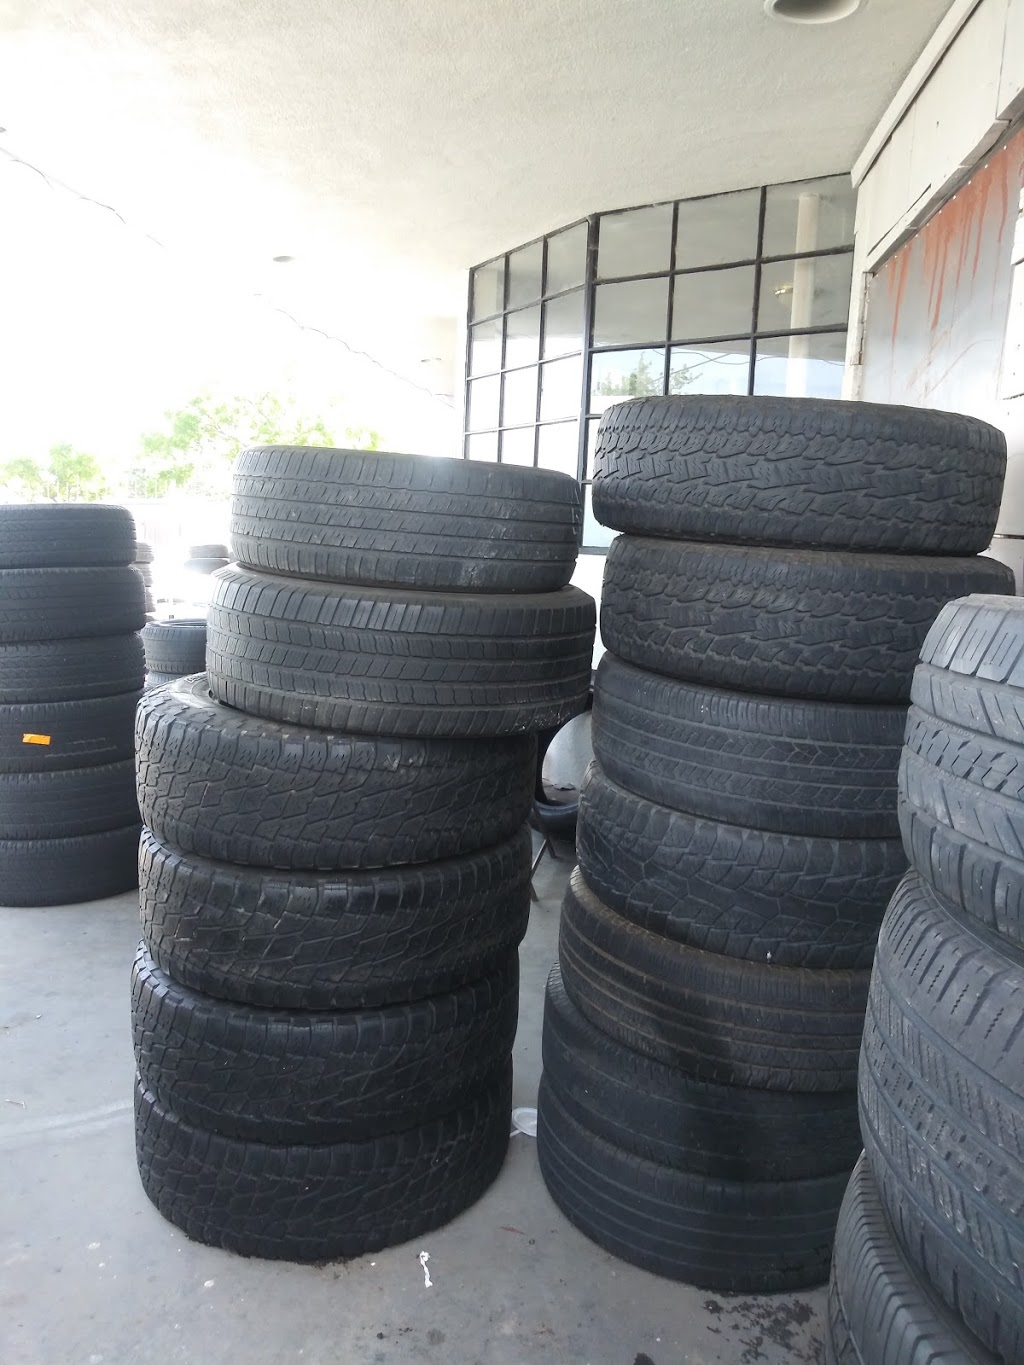 Arriagas Tire Company | 500 N Chester Ave, Bakersfield, CA 93301 | Phone: (661) 371-5691